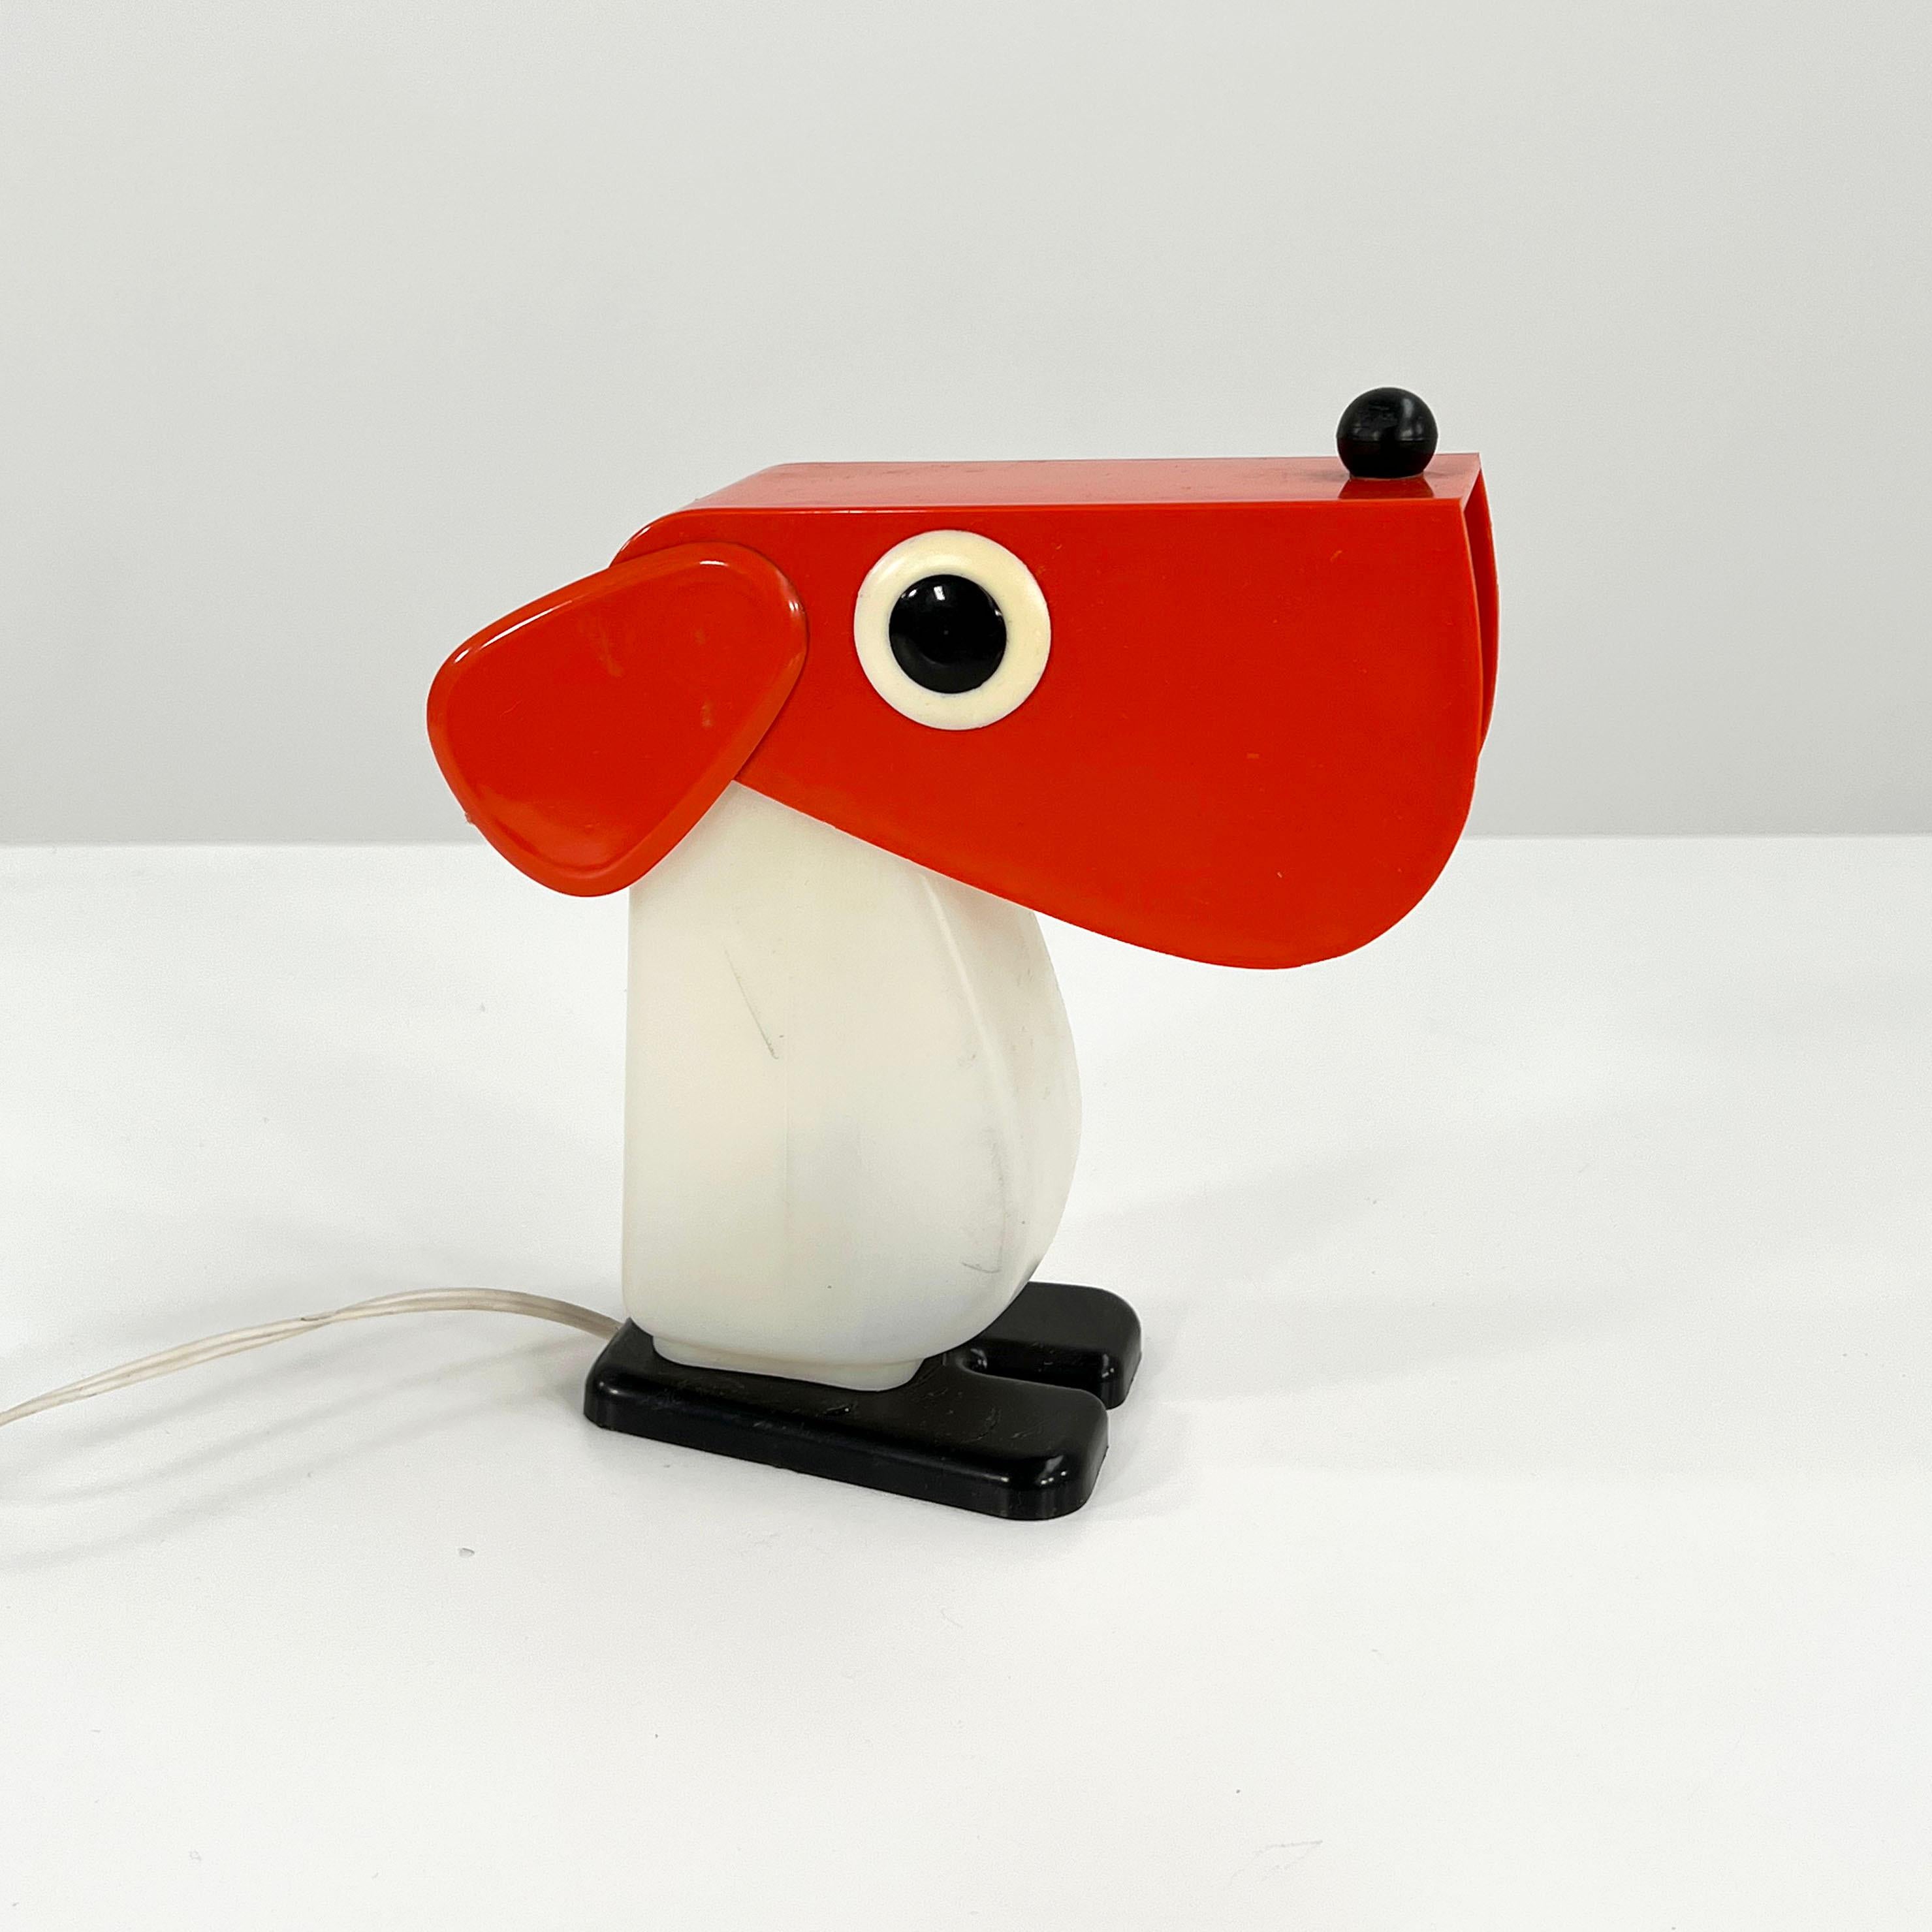 Plastic Dog Table Lamp by Fernando Cassetta for Tacman, 1970s